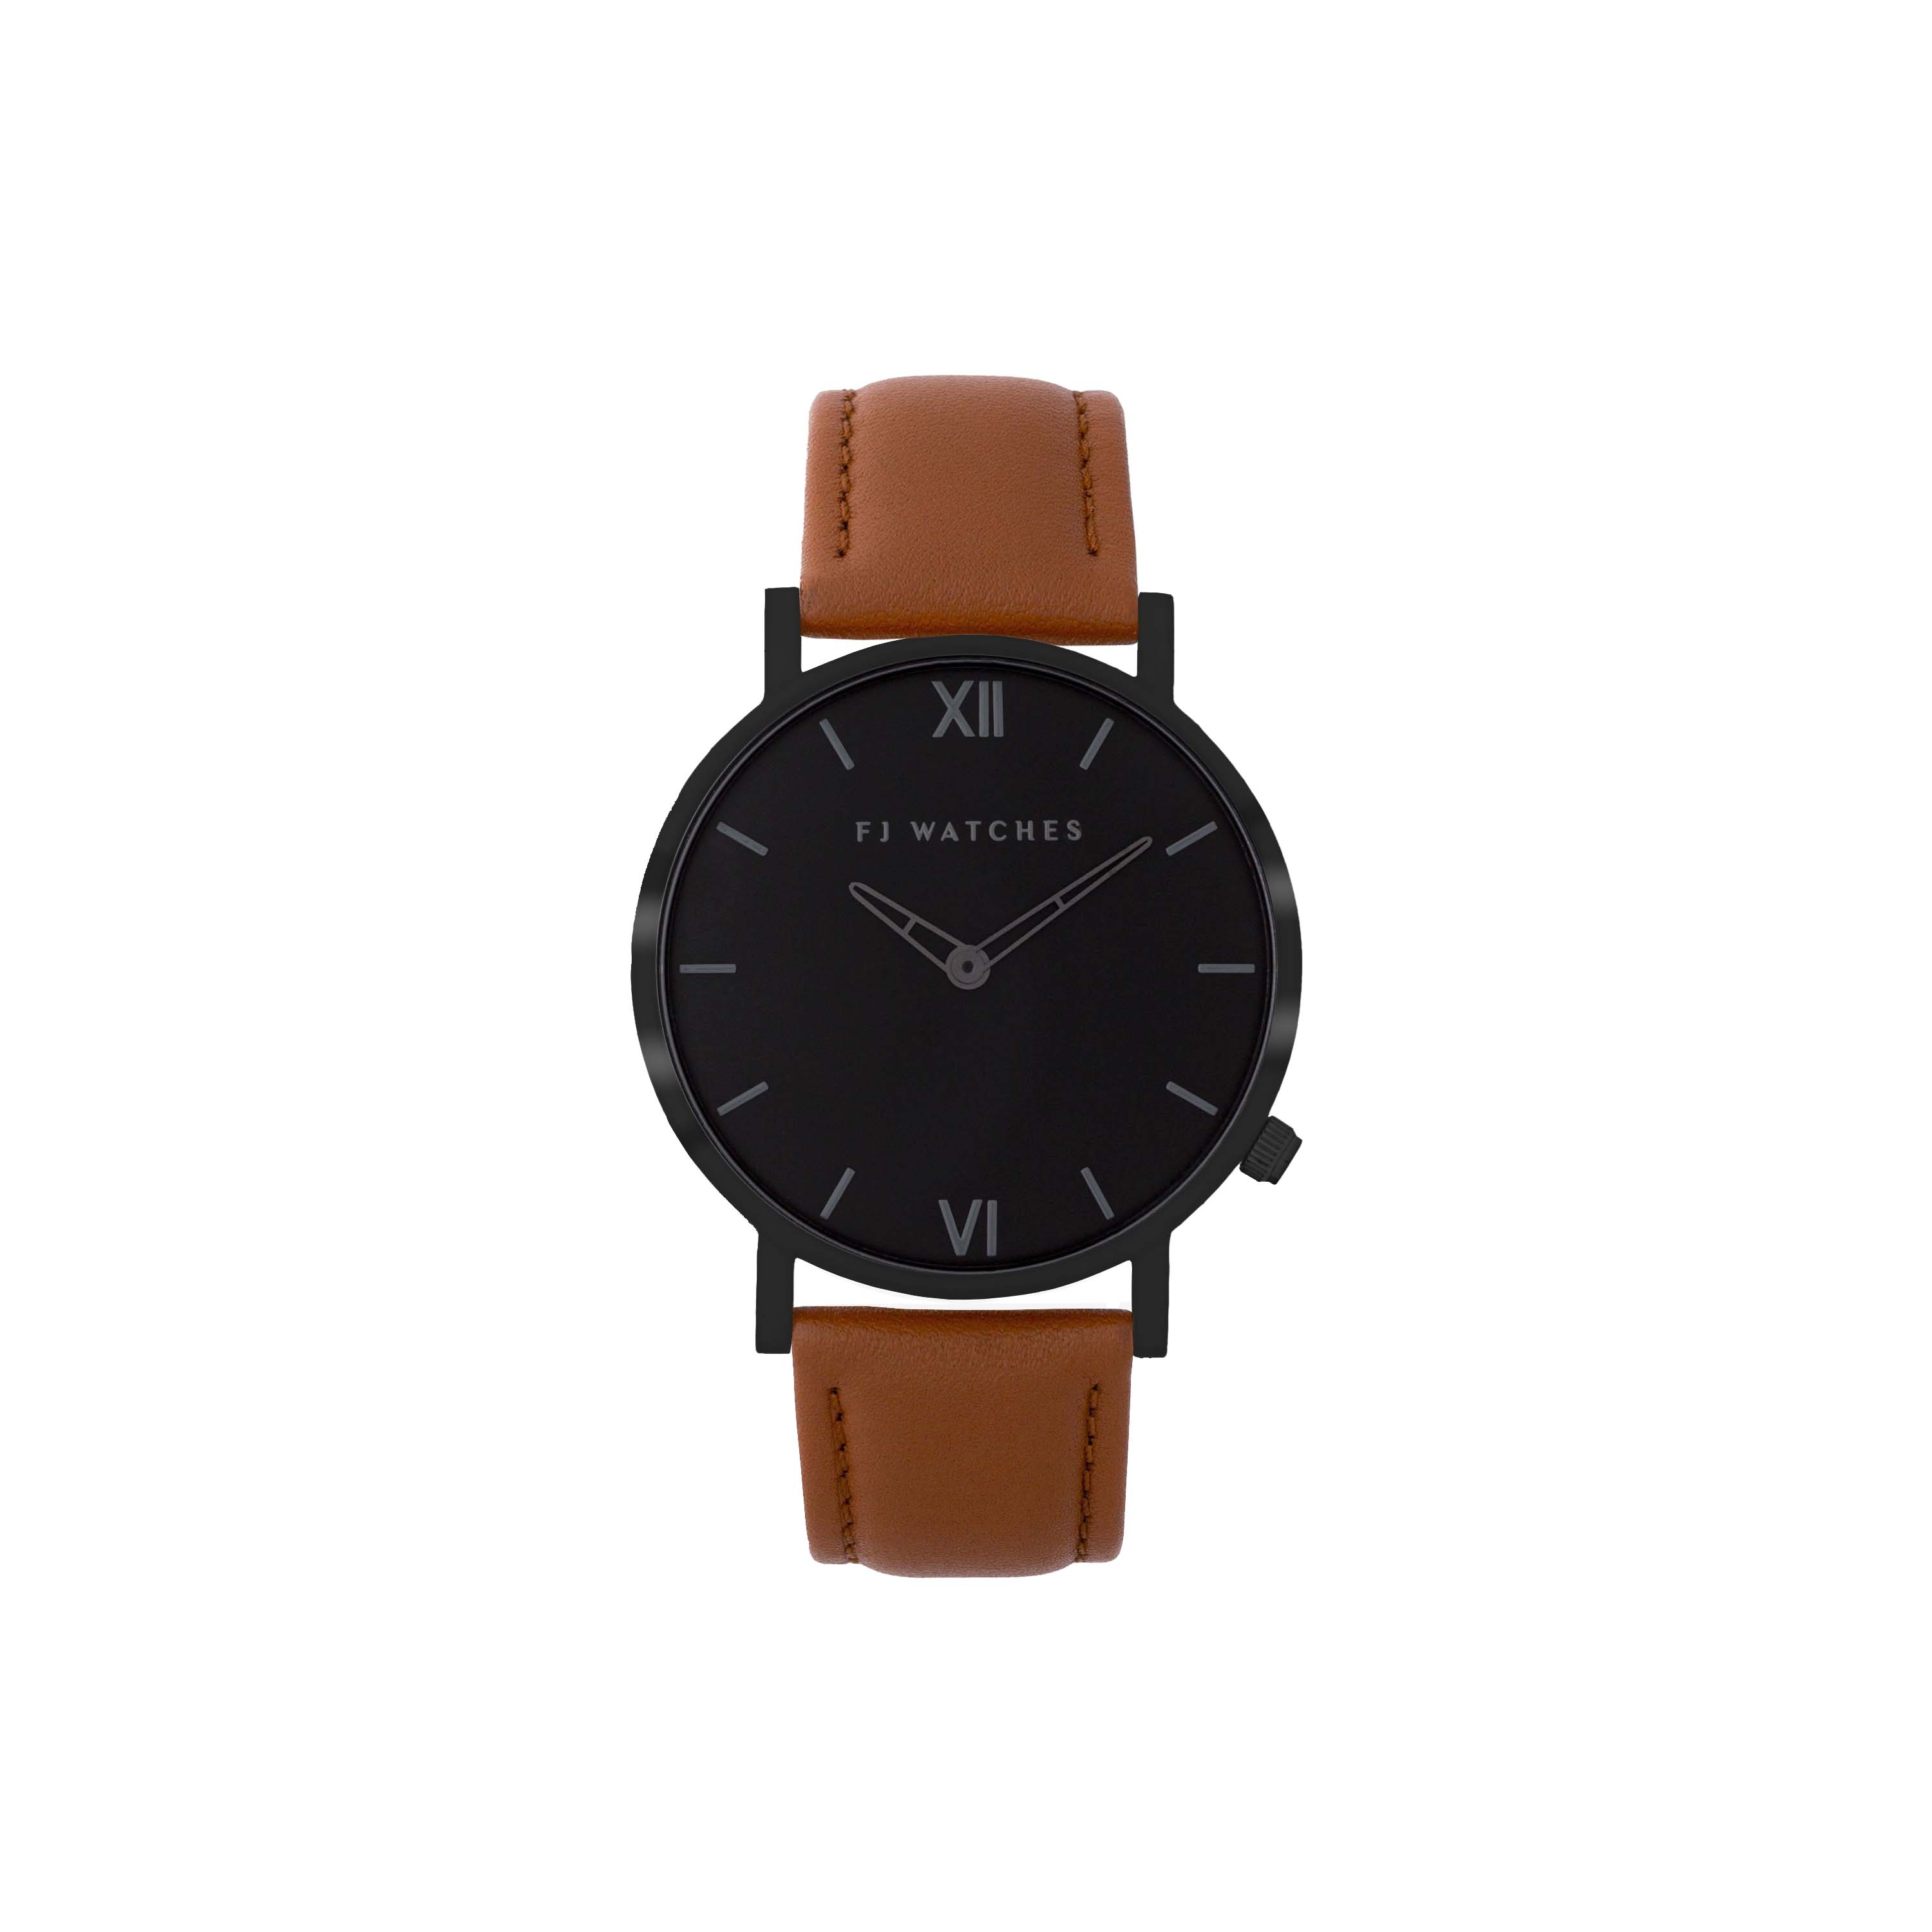 FJ Watches Dark moon all black watch for men 42mm with leather strap minimalist tan light brown